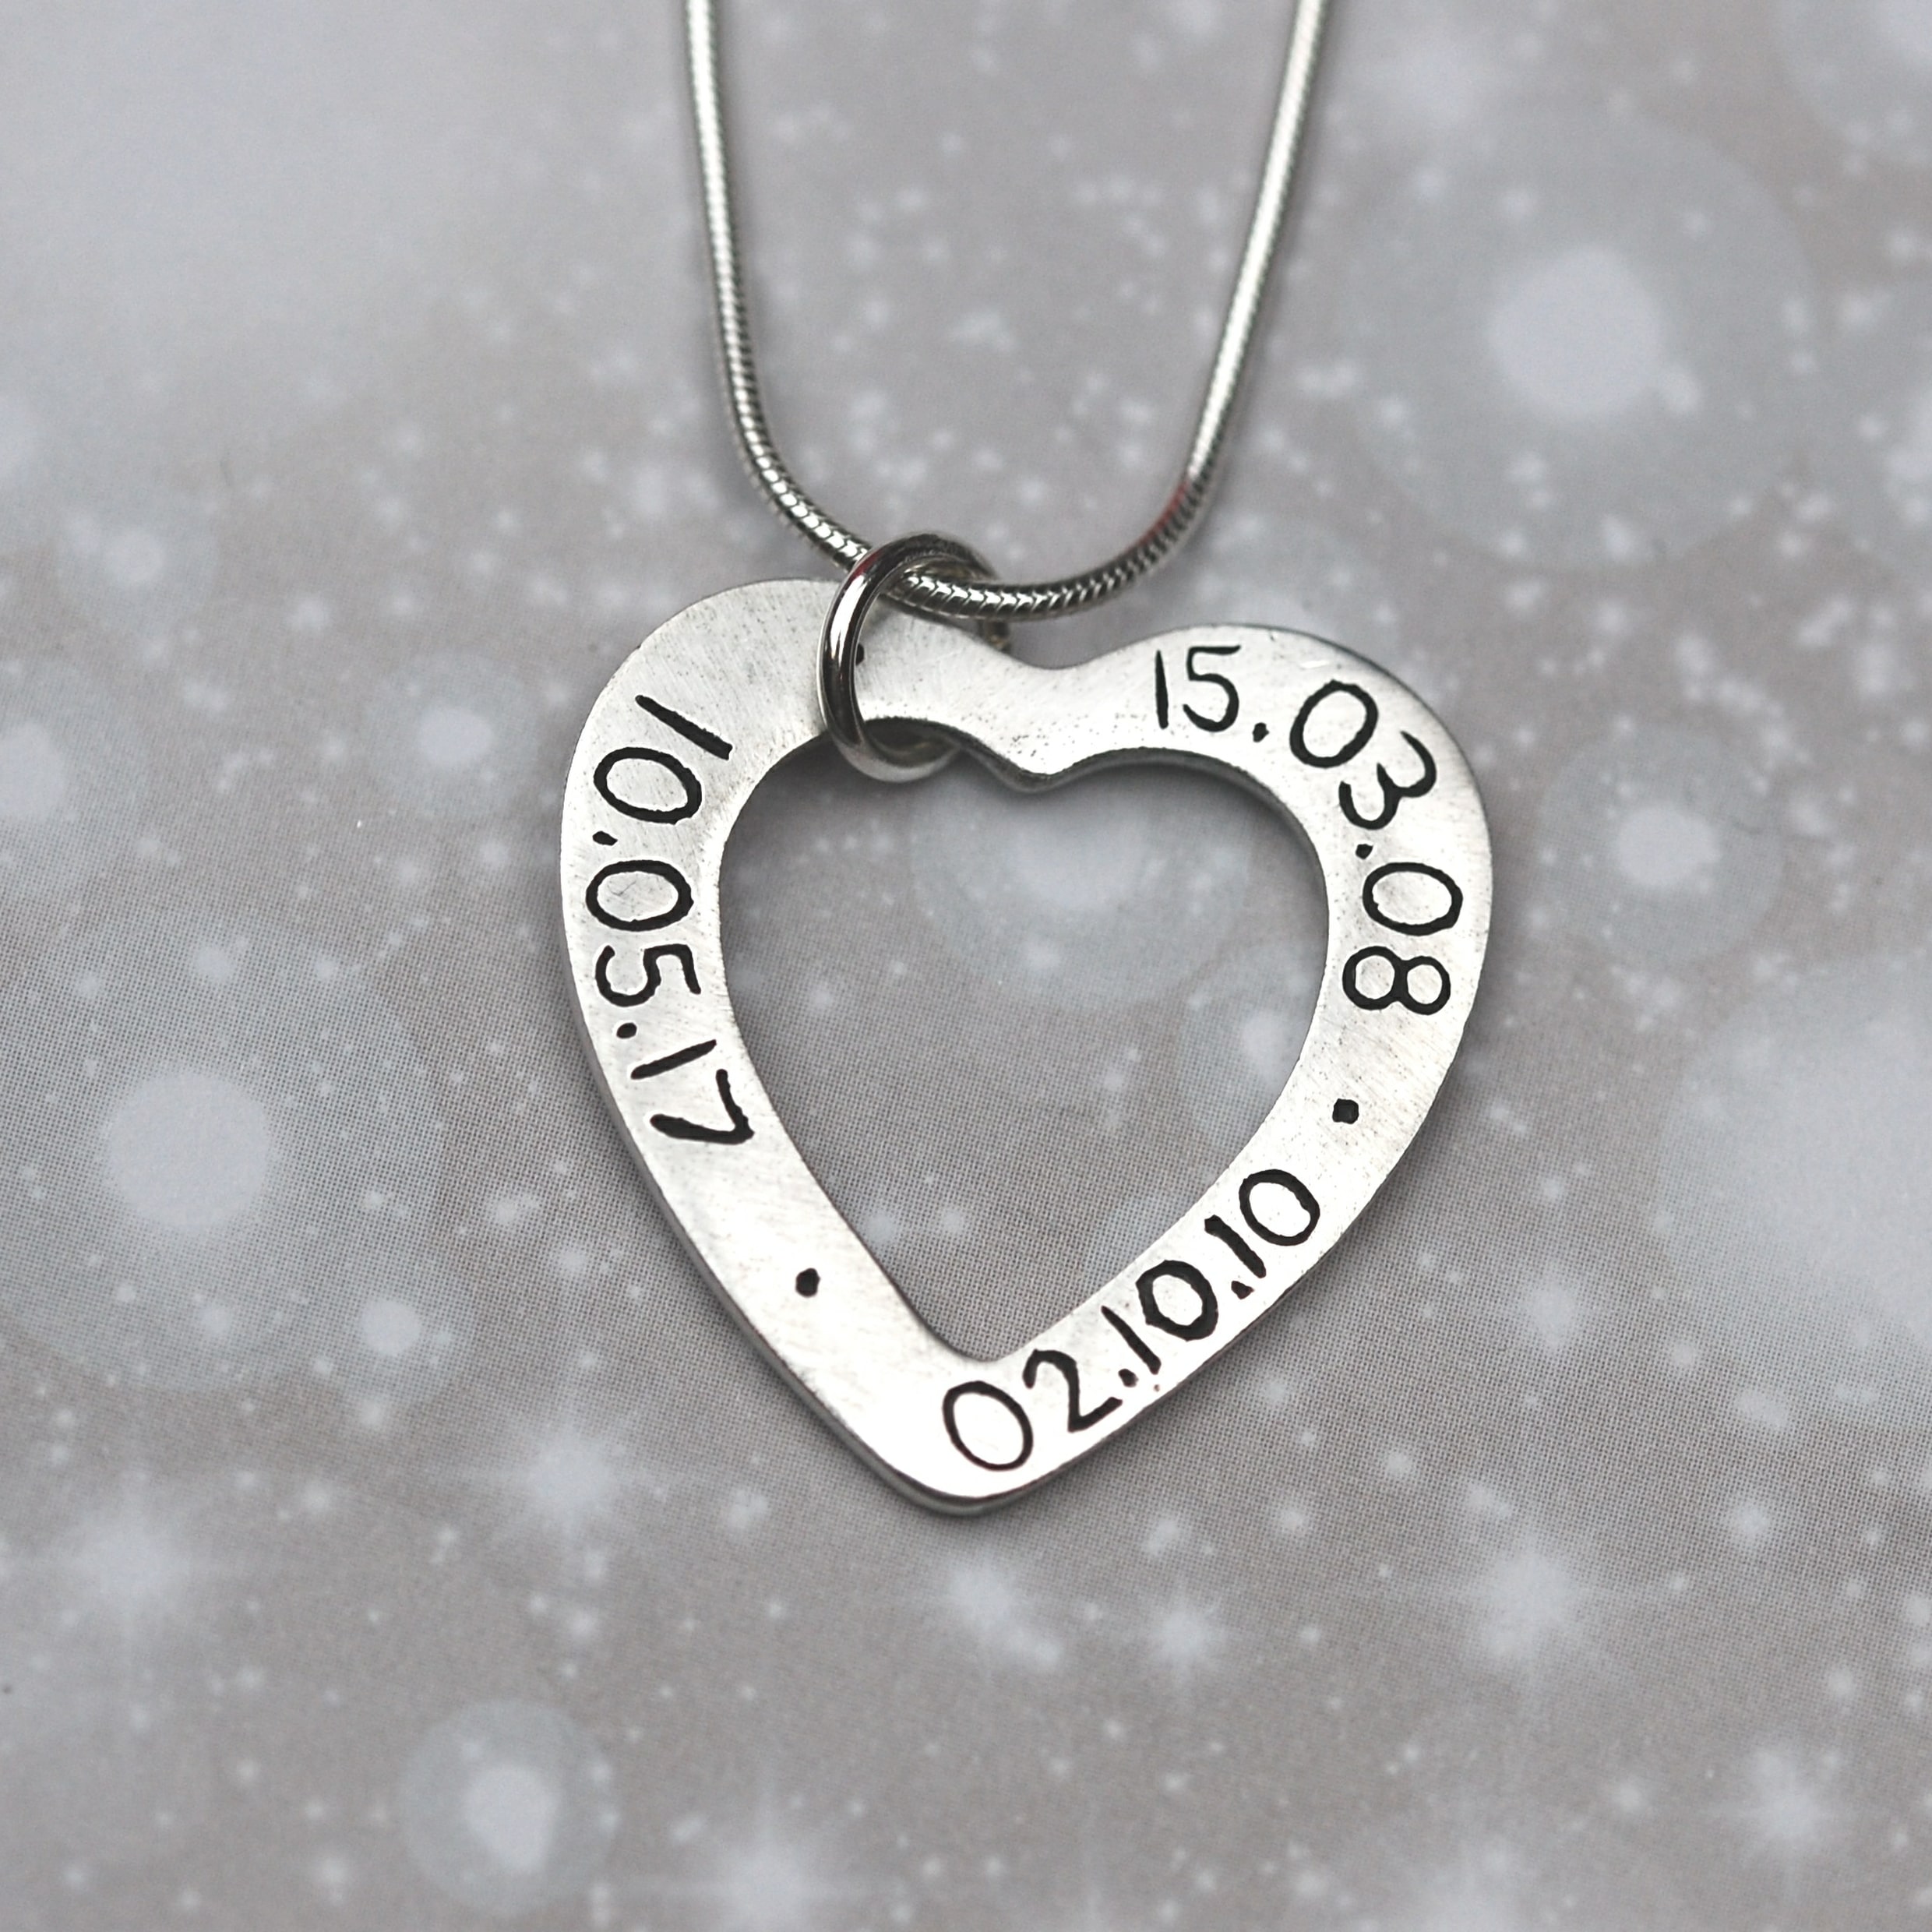 Inscription on the back of silver heart shaped name charm